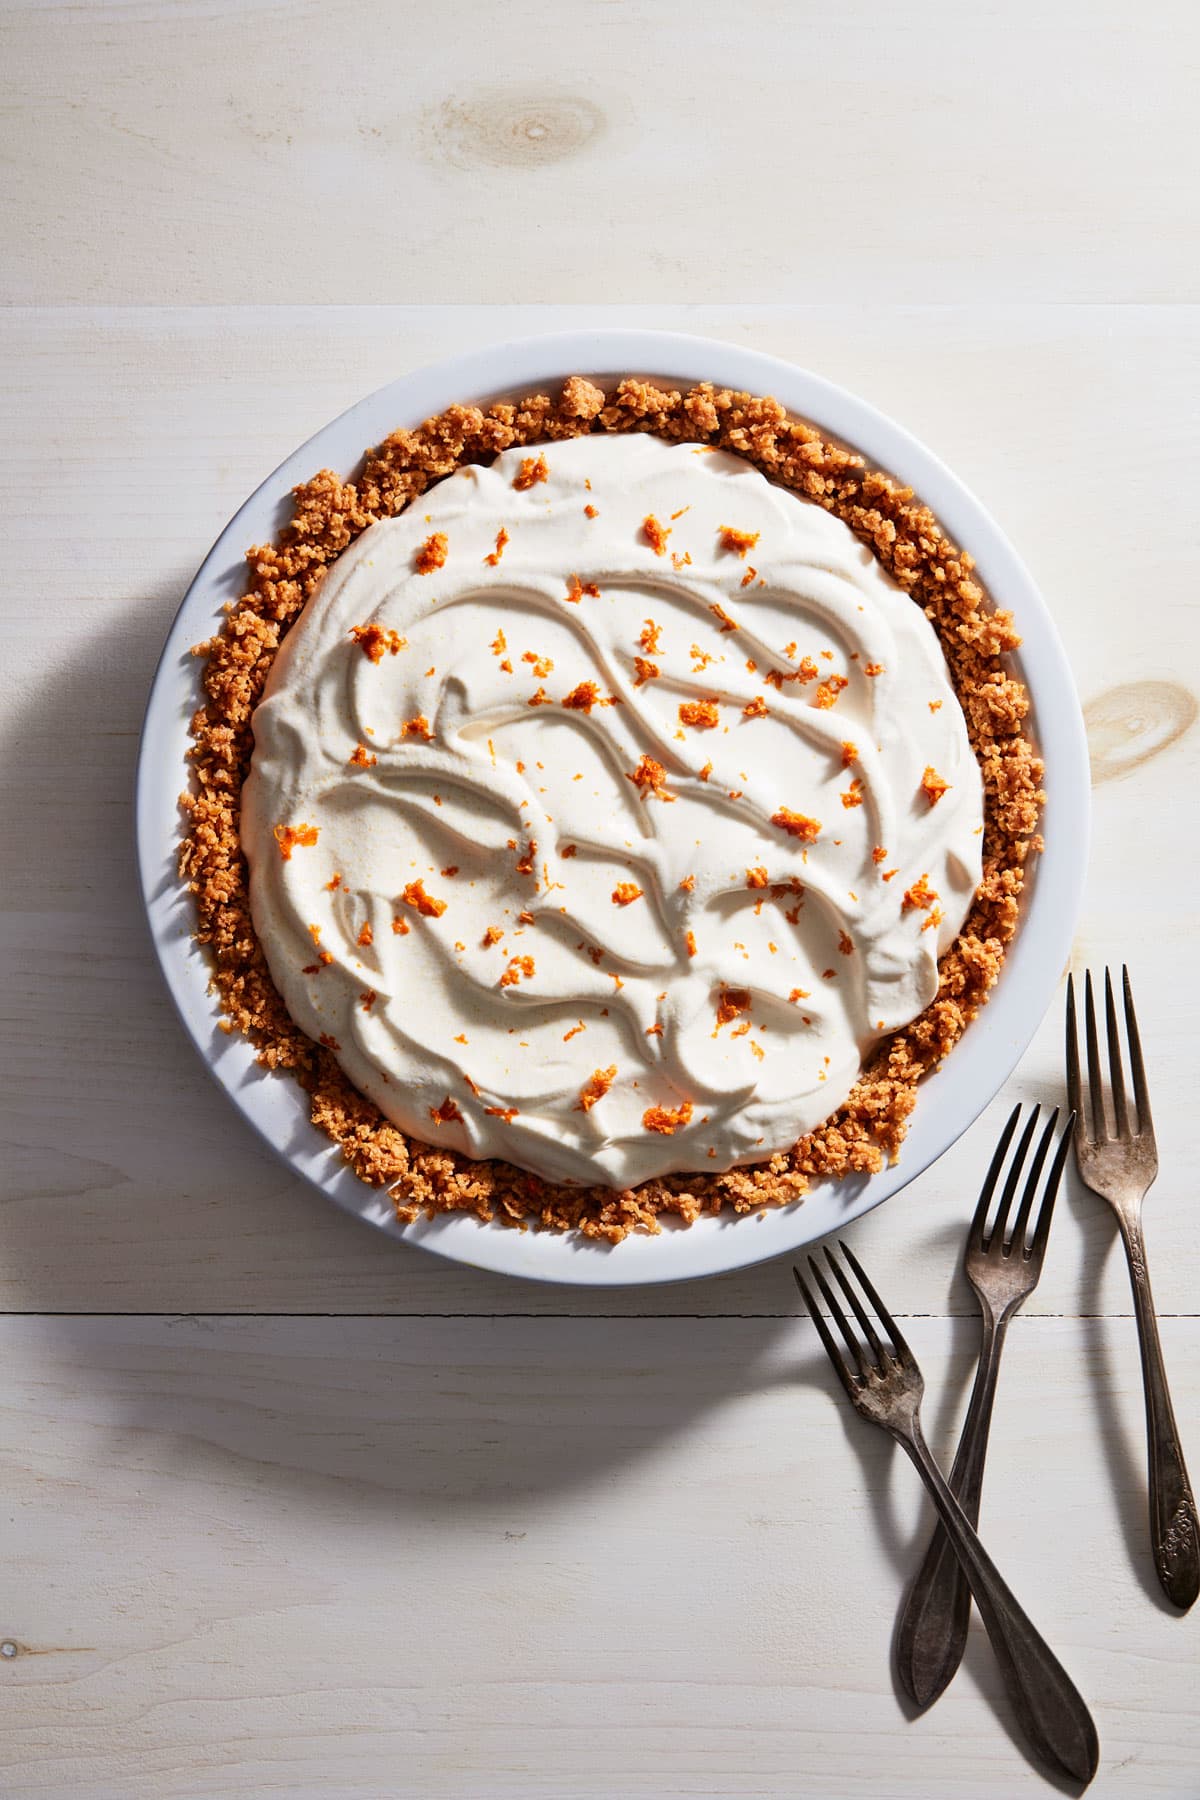 Snag your pie while supplies last!